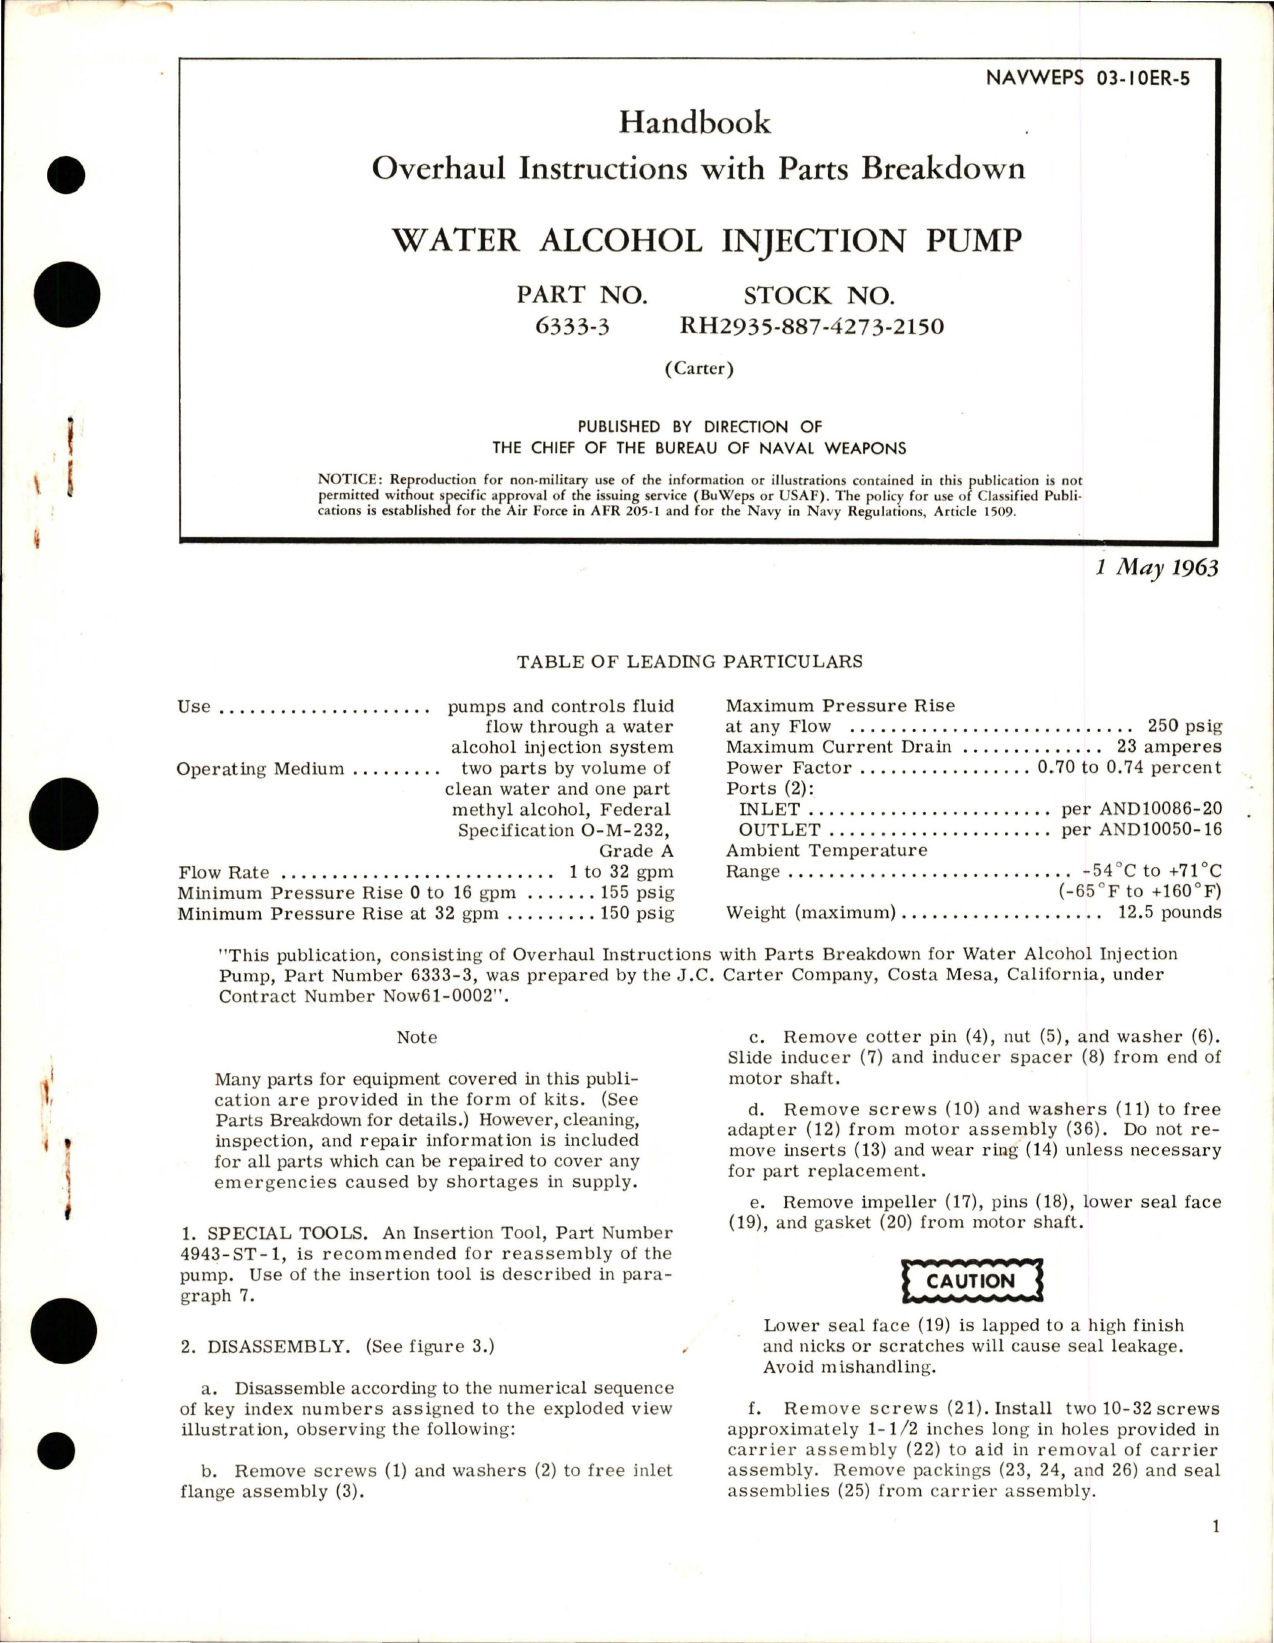 Sample page 1 from AirCorps Library document: Overhaul Instructions with Parts for Water Alcohol Injection Pump - Part 6333-3